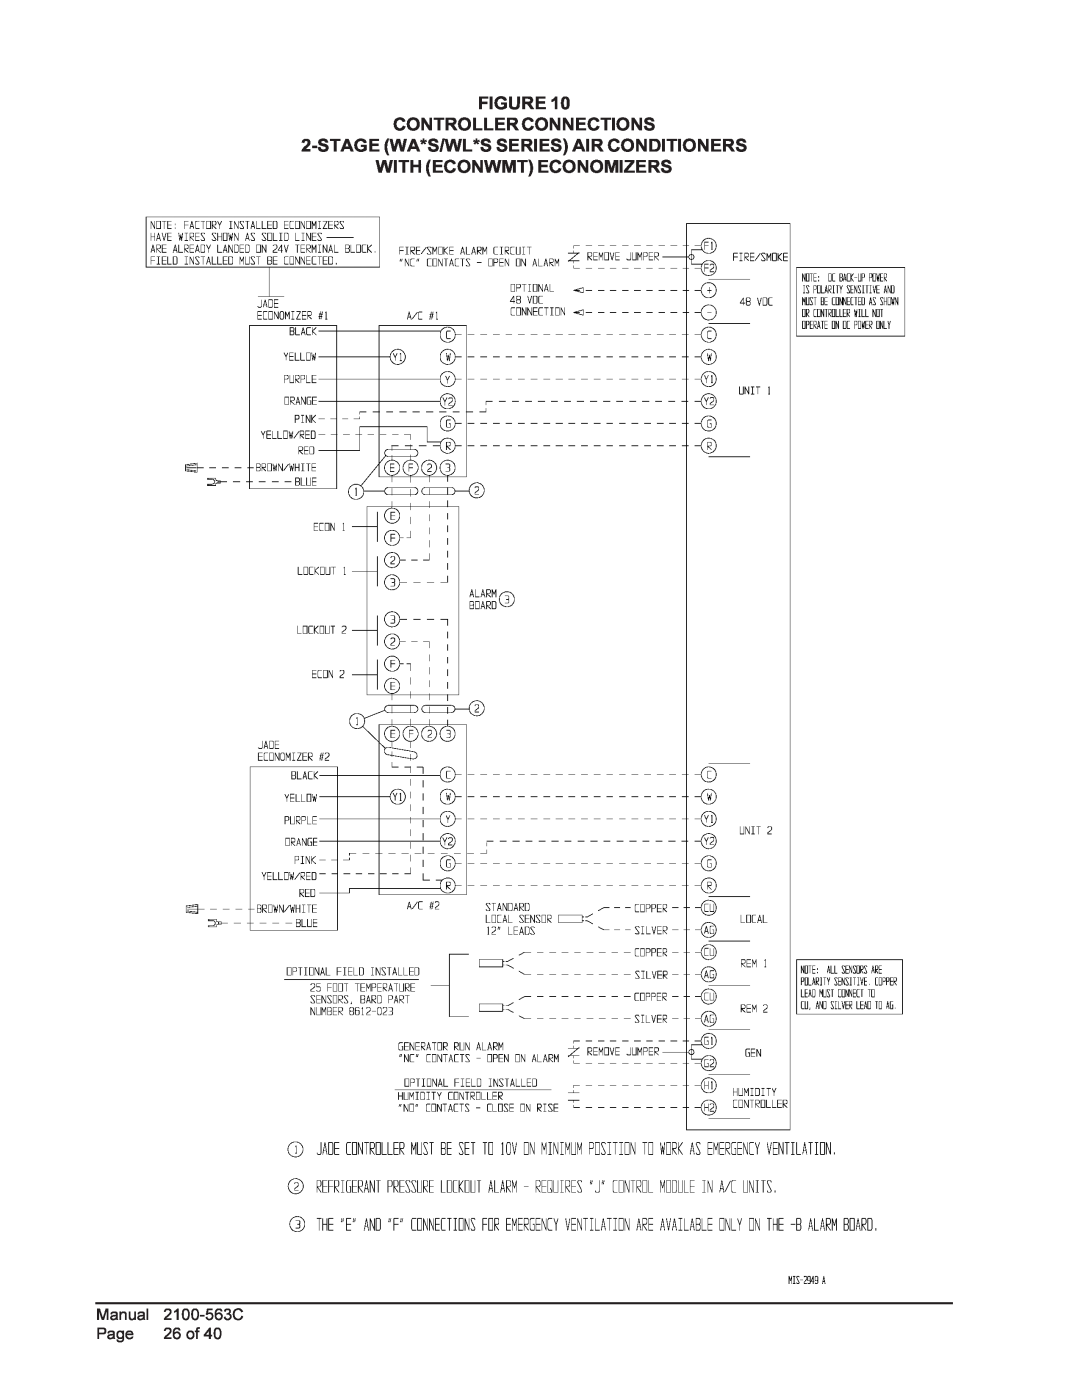 Bard MC4000 Figure Controllerconnections, Stagewa*S/Wl*S Series Air Conditioners, With Econwmt Economizers, Manual, Page 